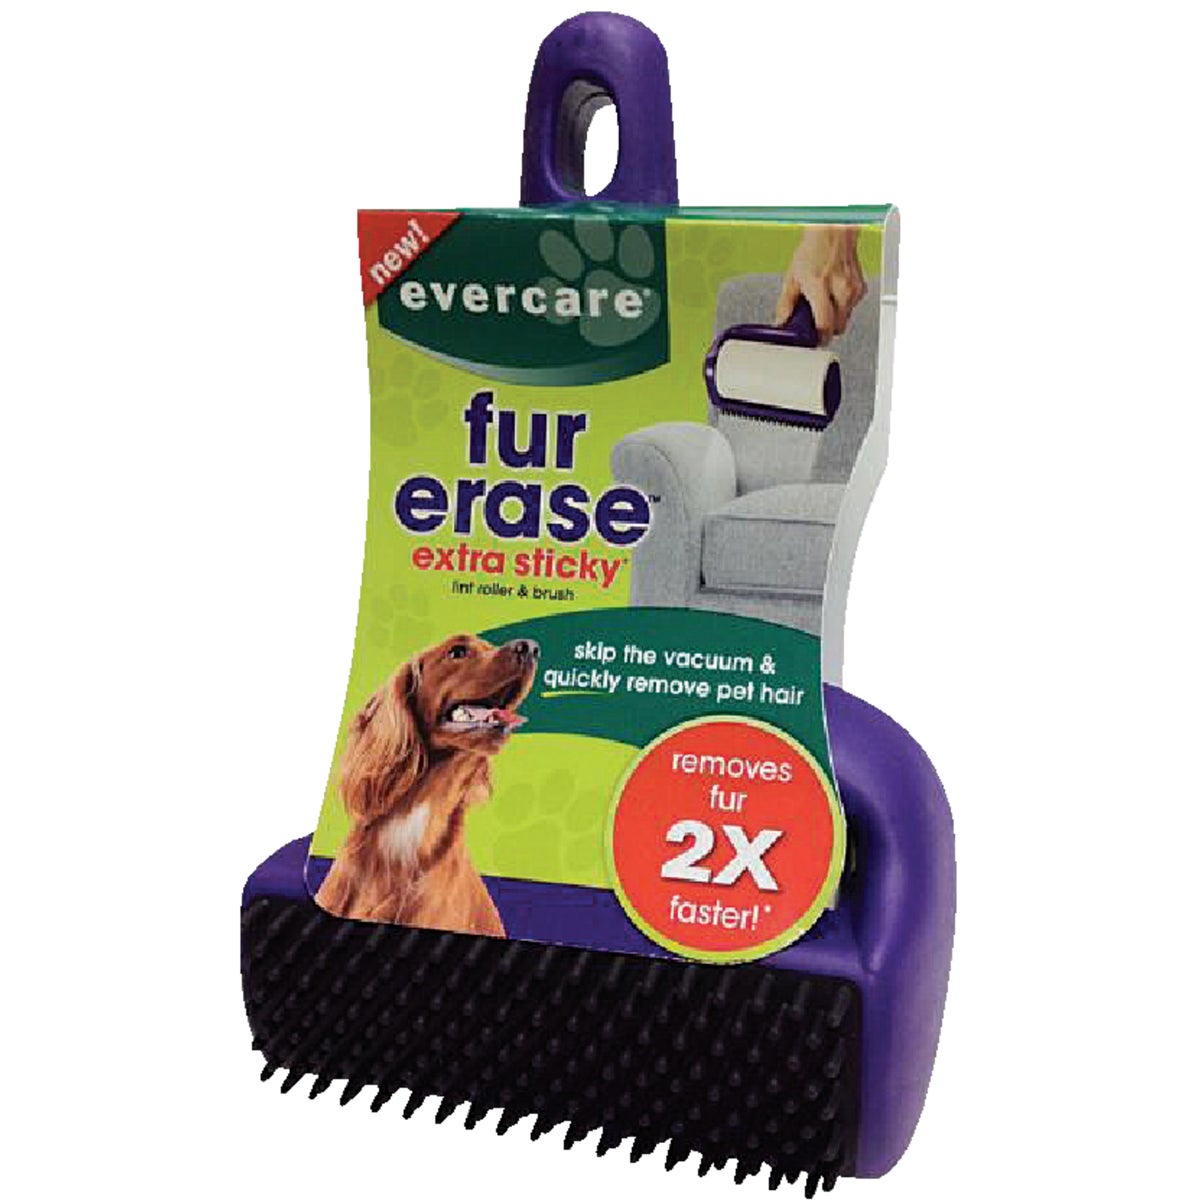 Evercare Fur Erase 4 In. Roller with Brush Pet Hair Remover